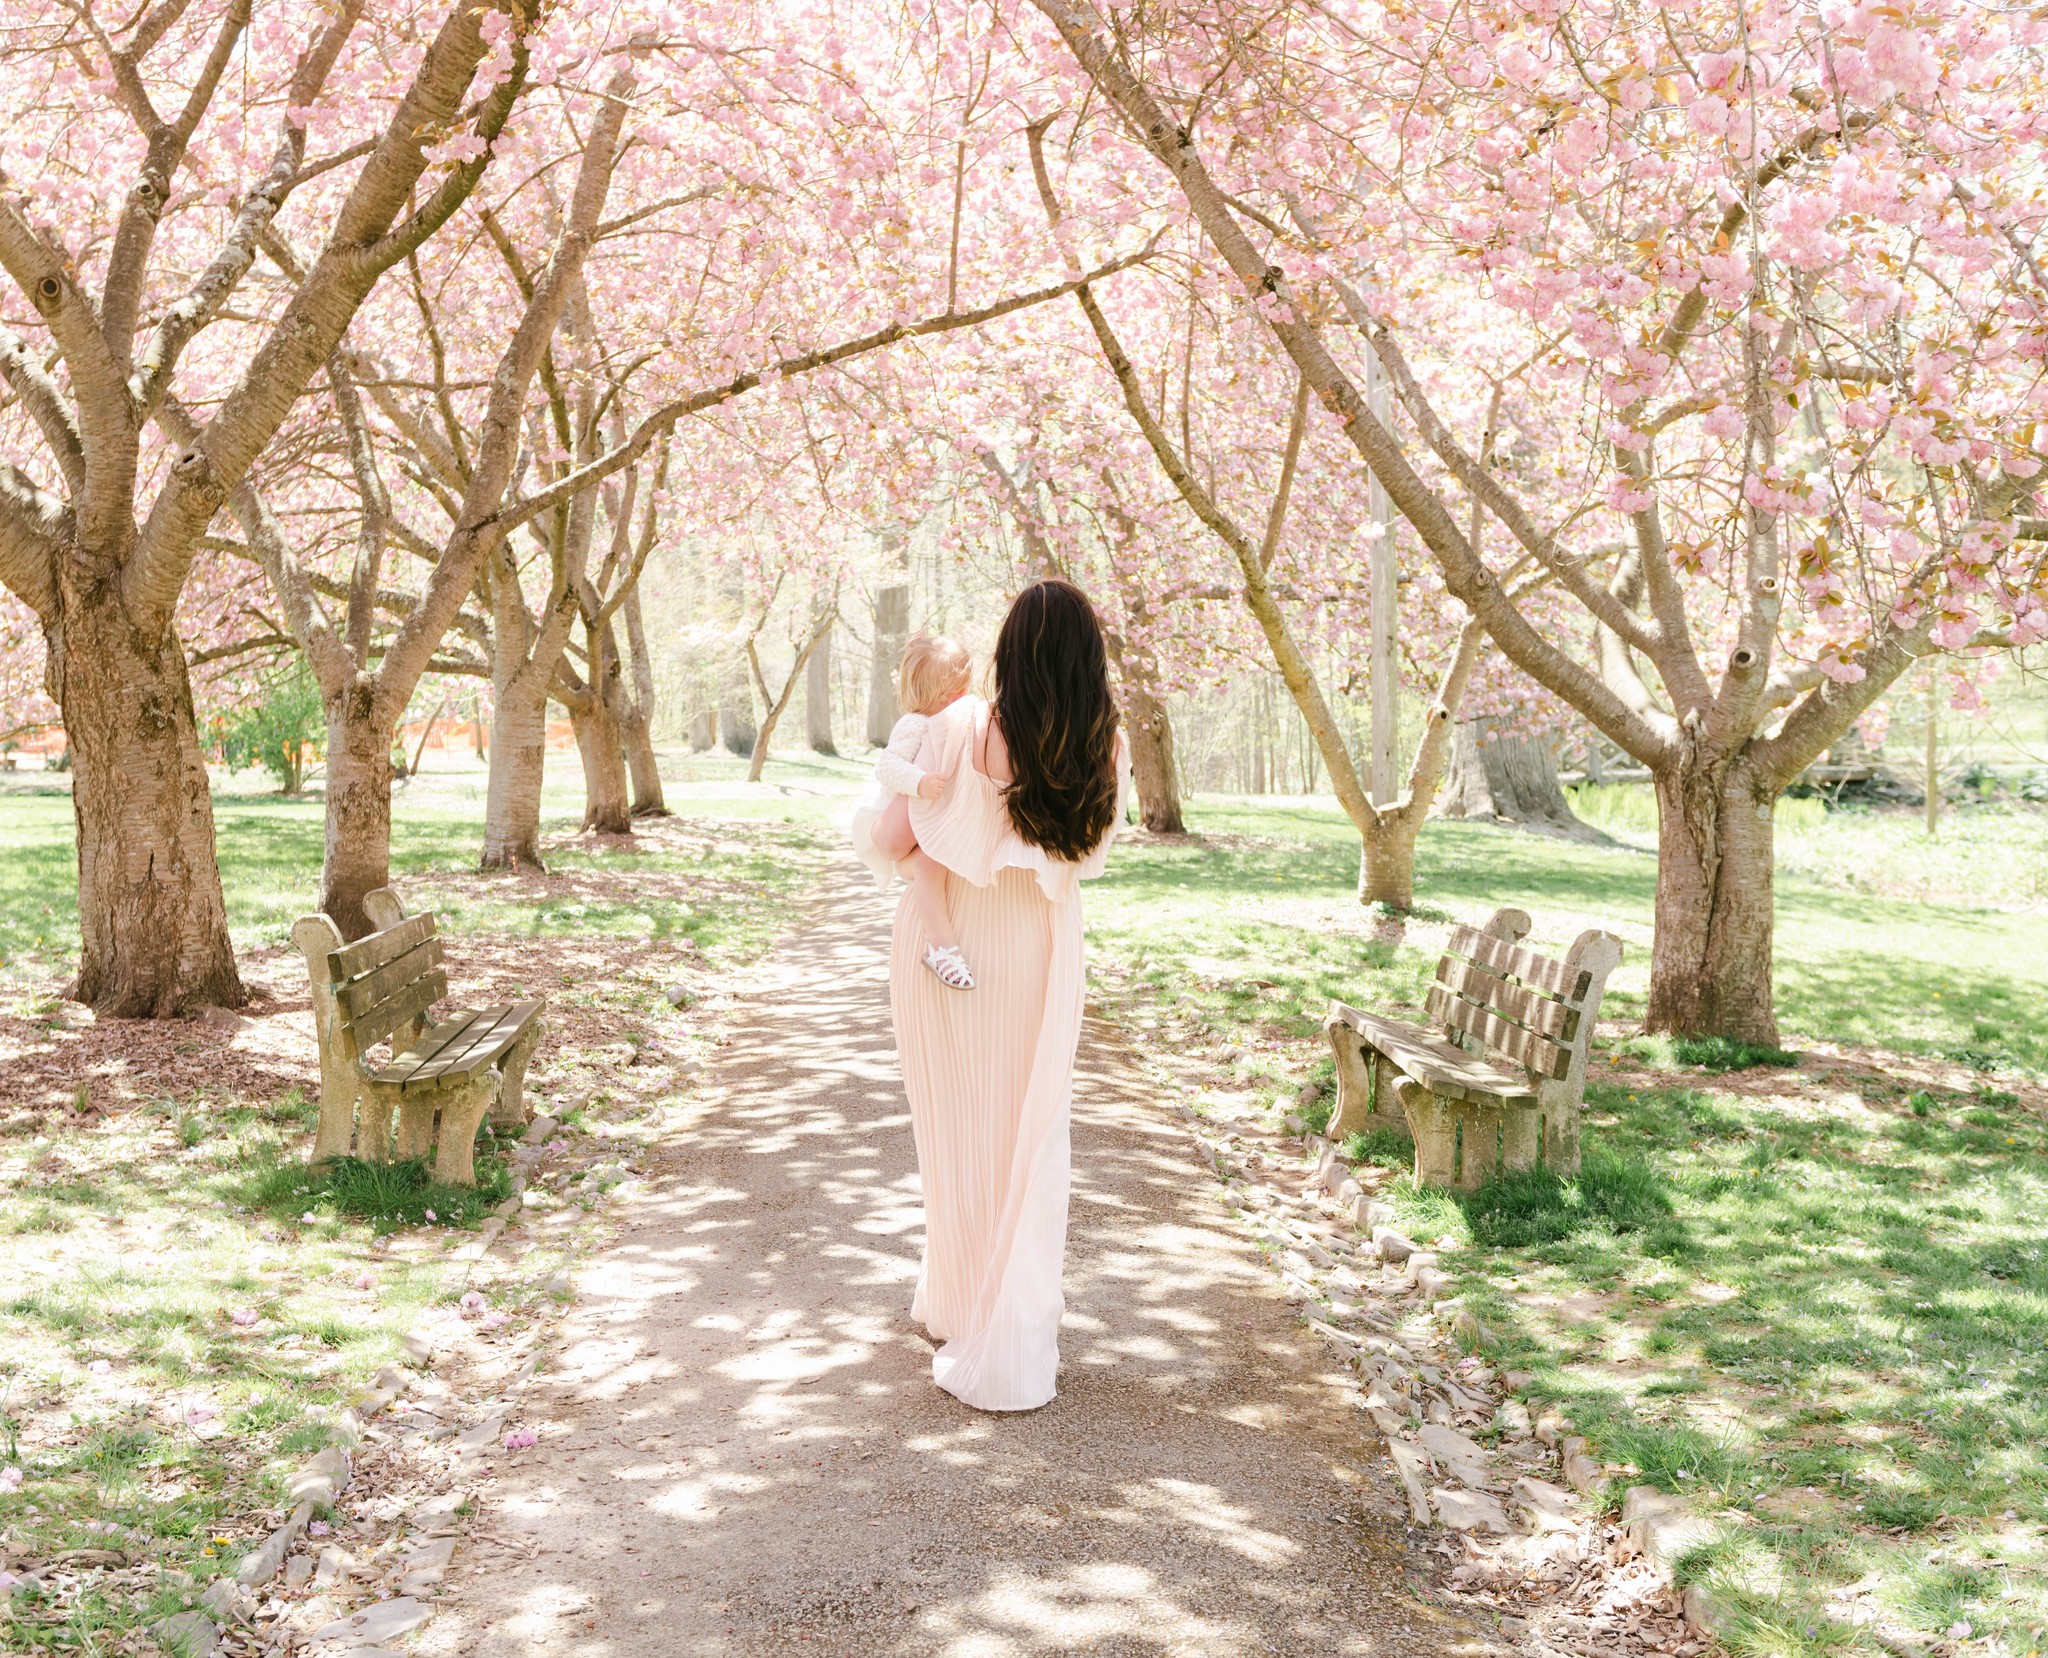 A mom in a pink dress walks through a park path lined with benches and pink flowering trees